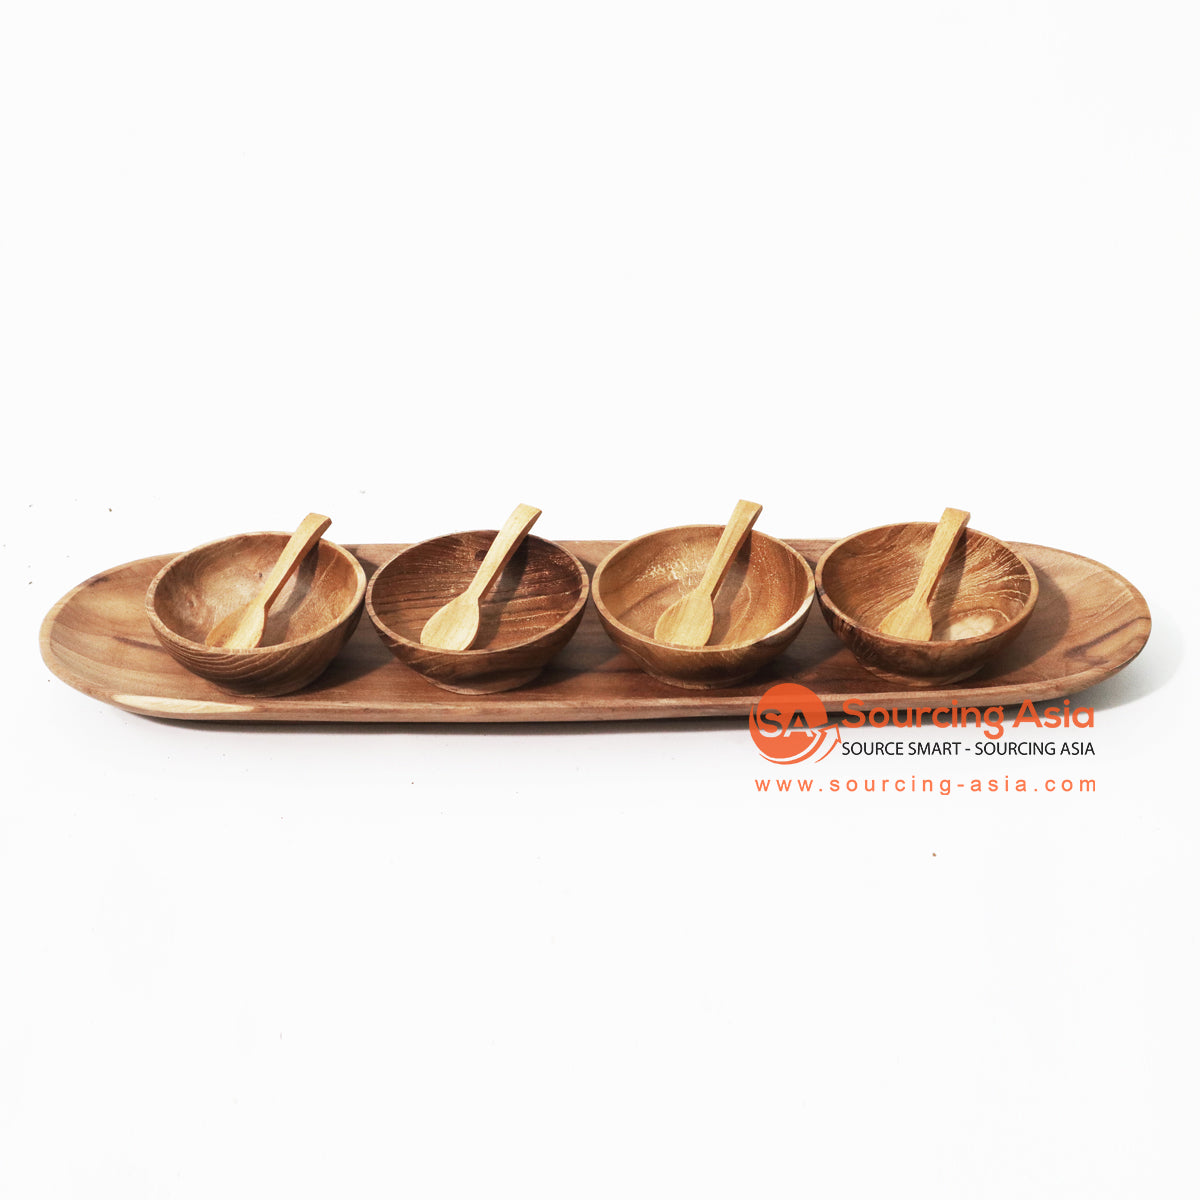 MSB004 NATURAL TEAK WOOD TRAY SET WITH FOUR BOWLS DIA. 8X3CM AND SPOONS